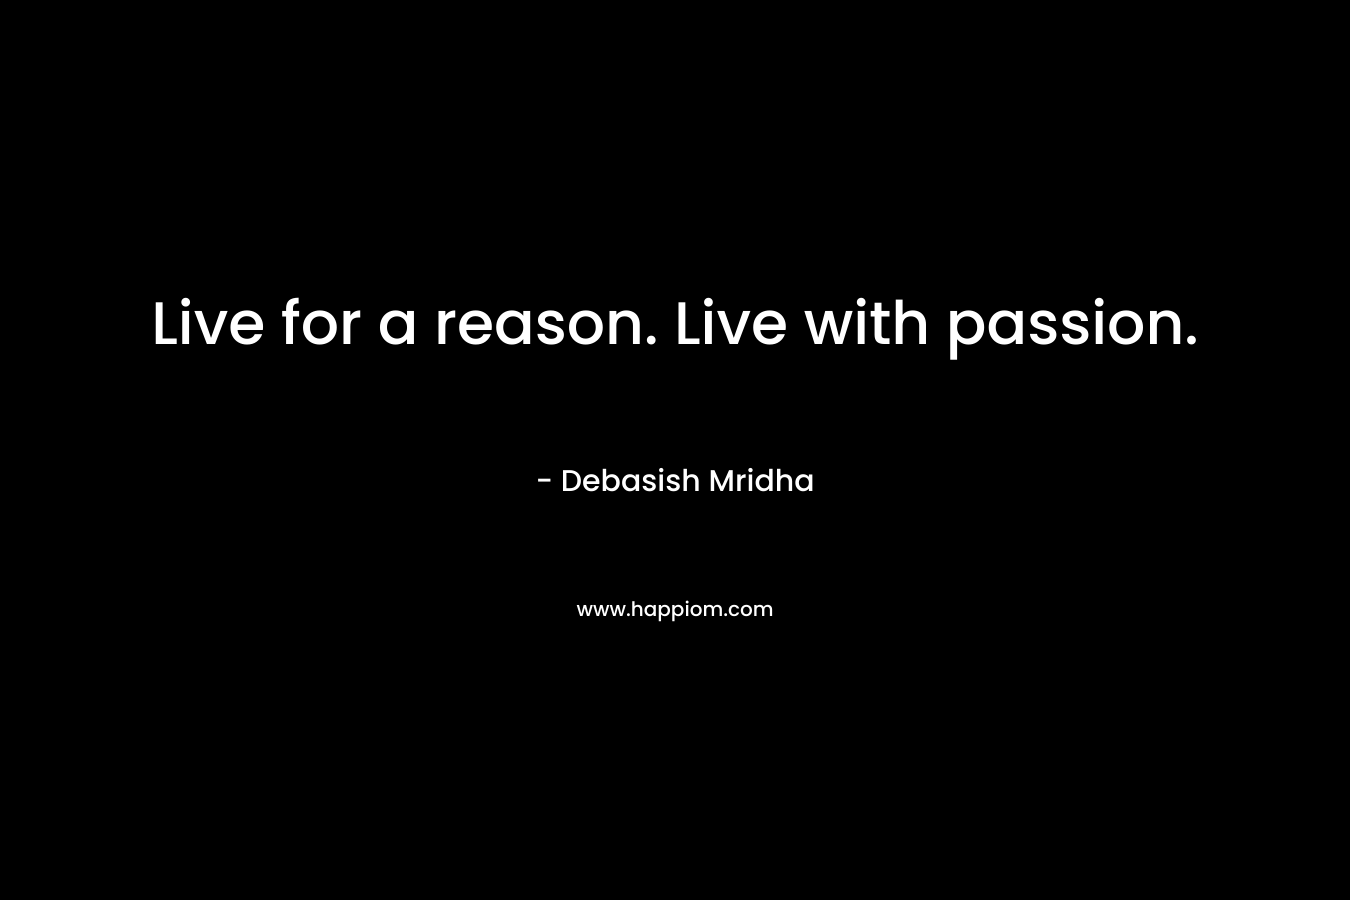 Live for a reason. Live with passion.